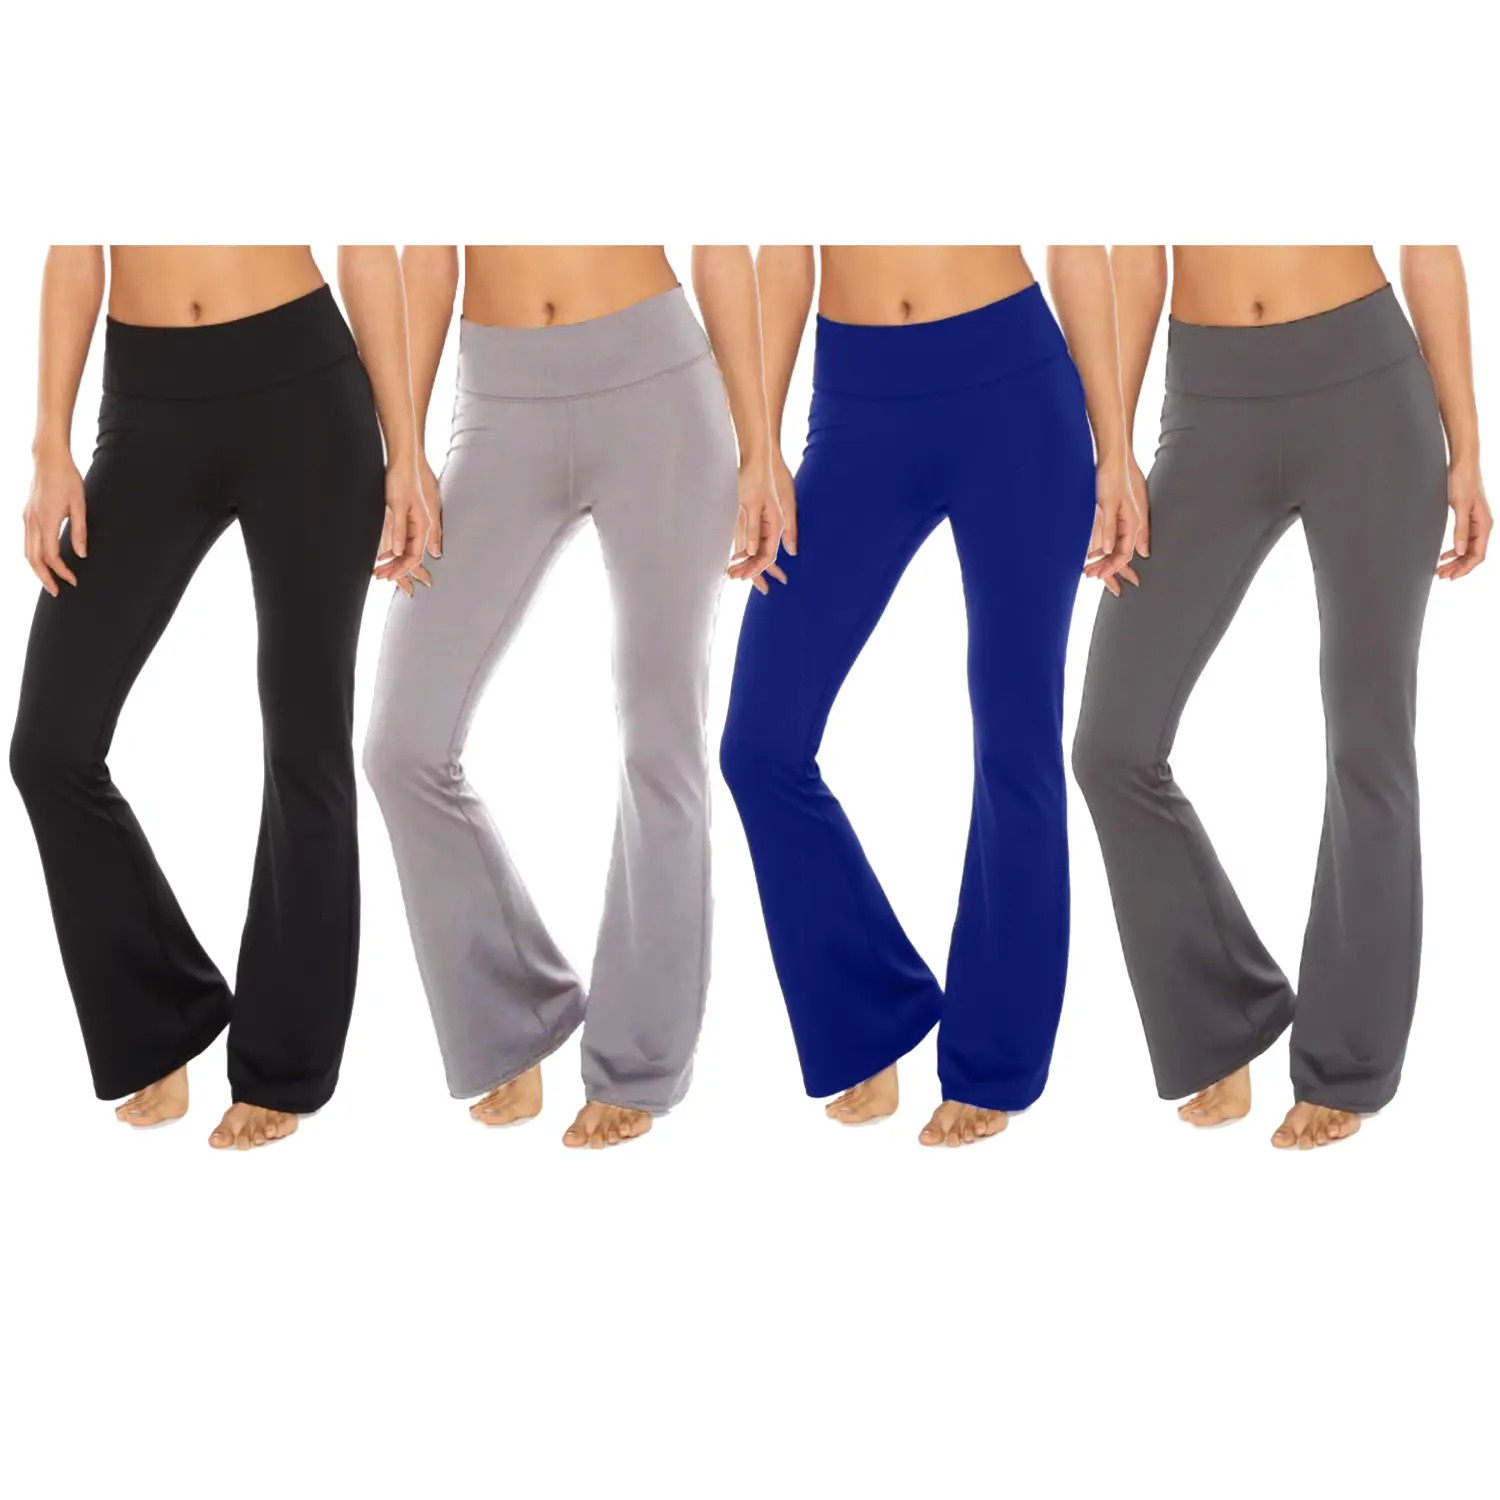 3-Pack Assorted Women's High Waist Tummy Control Yoga Pants for $31.99 + Free Shipping